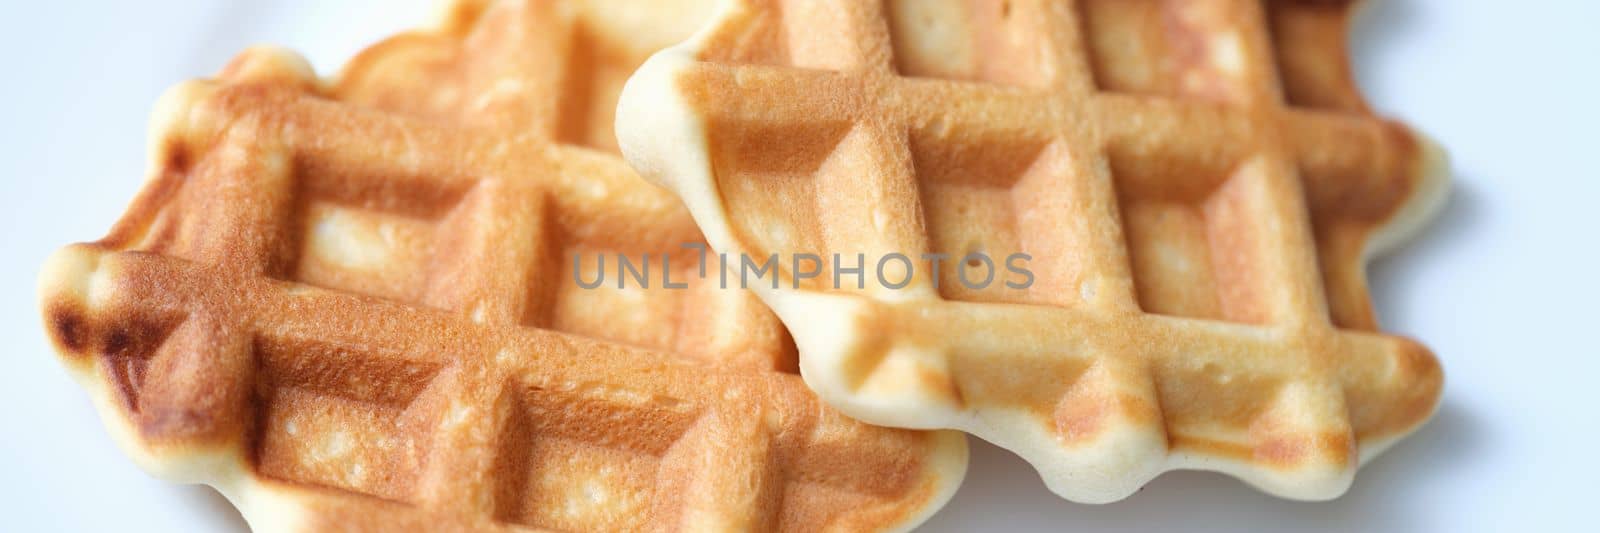 Two freshly baked Belgian waffles on white plate. Recipe dough for Belgian waffles concept